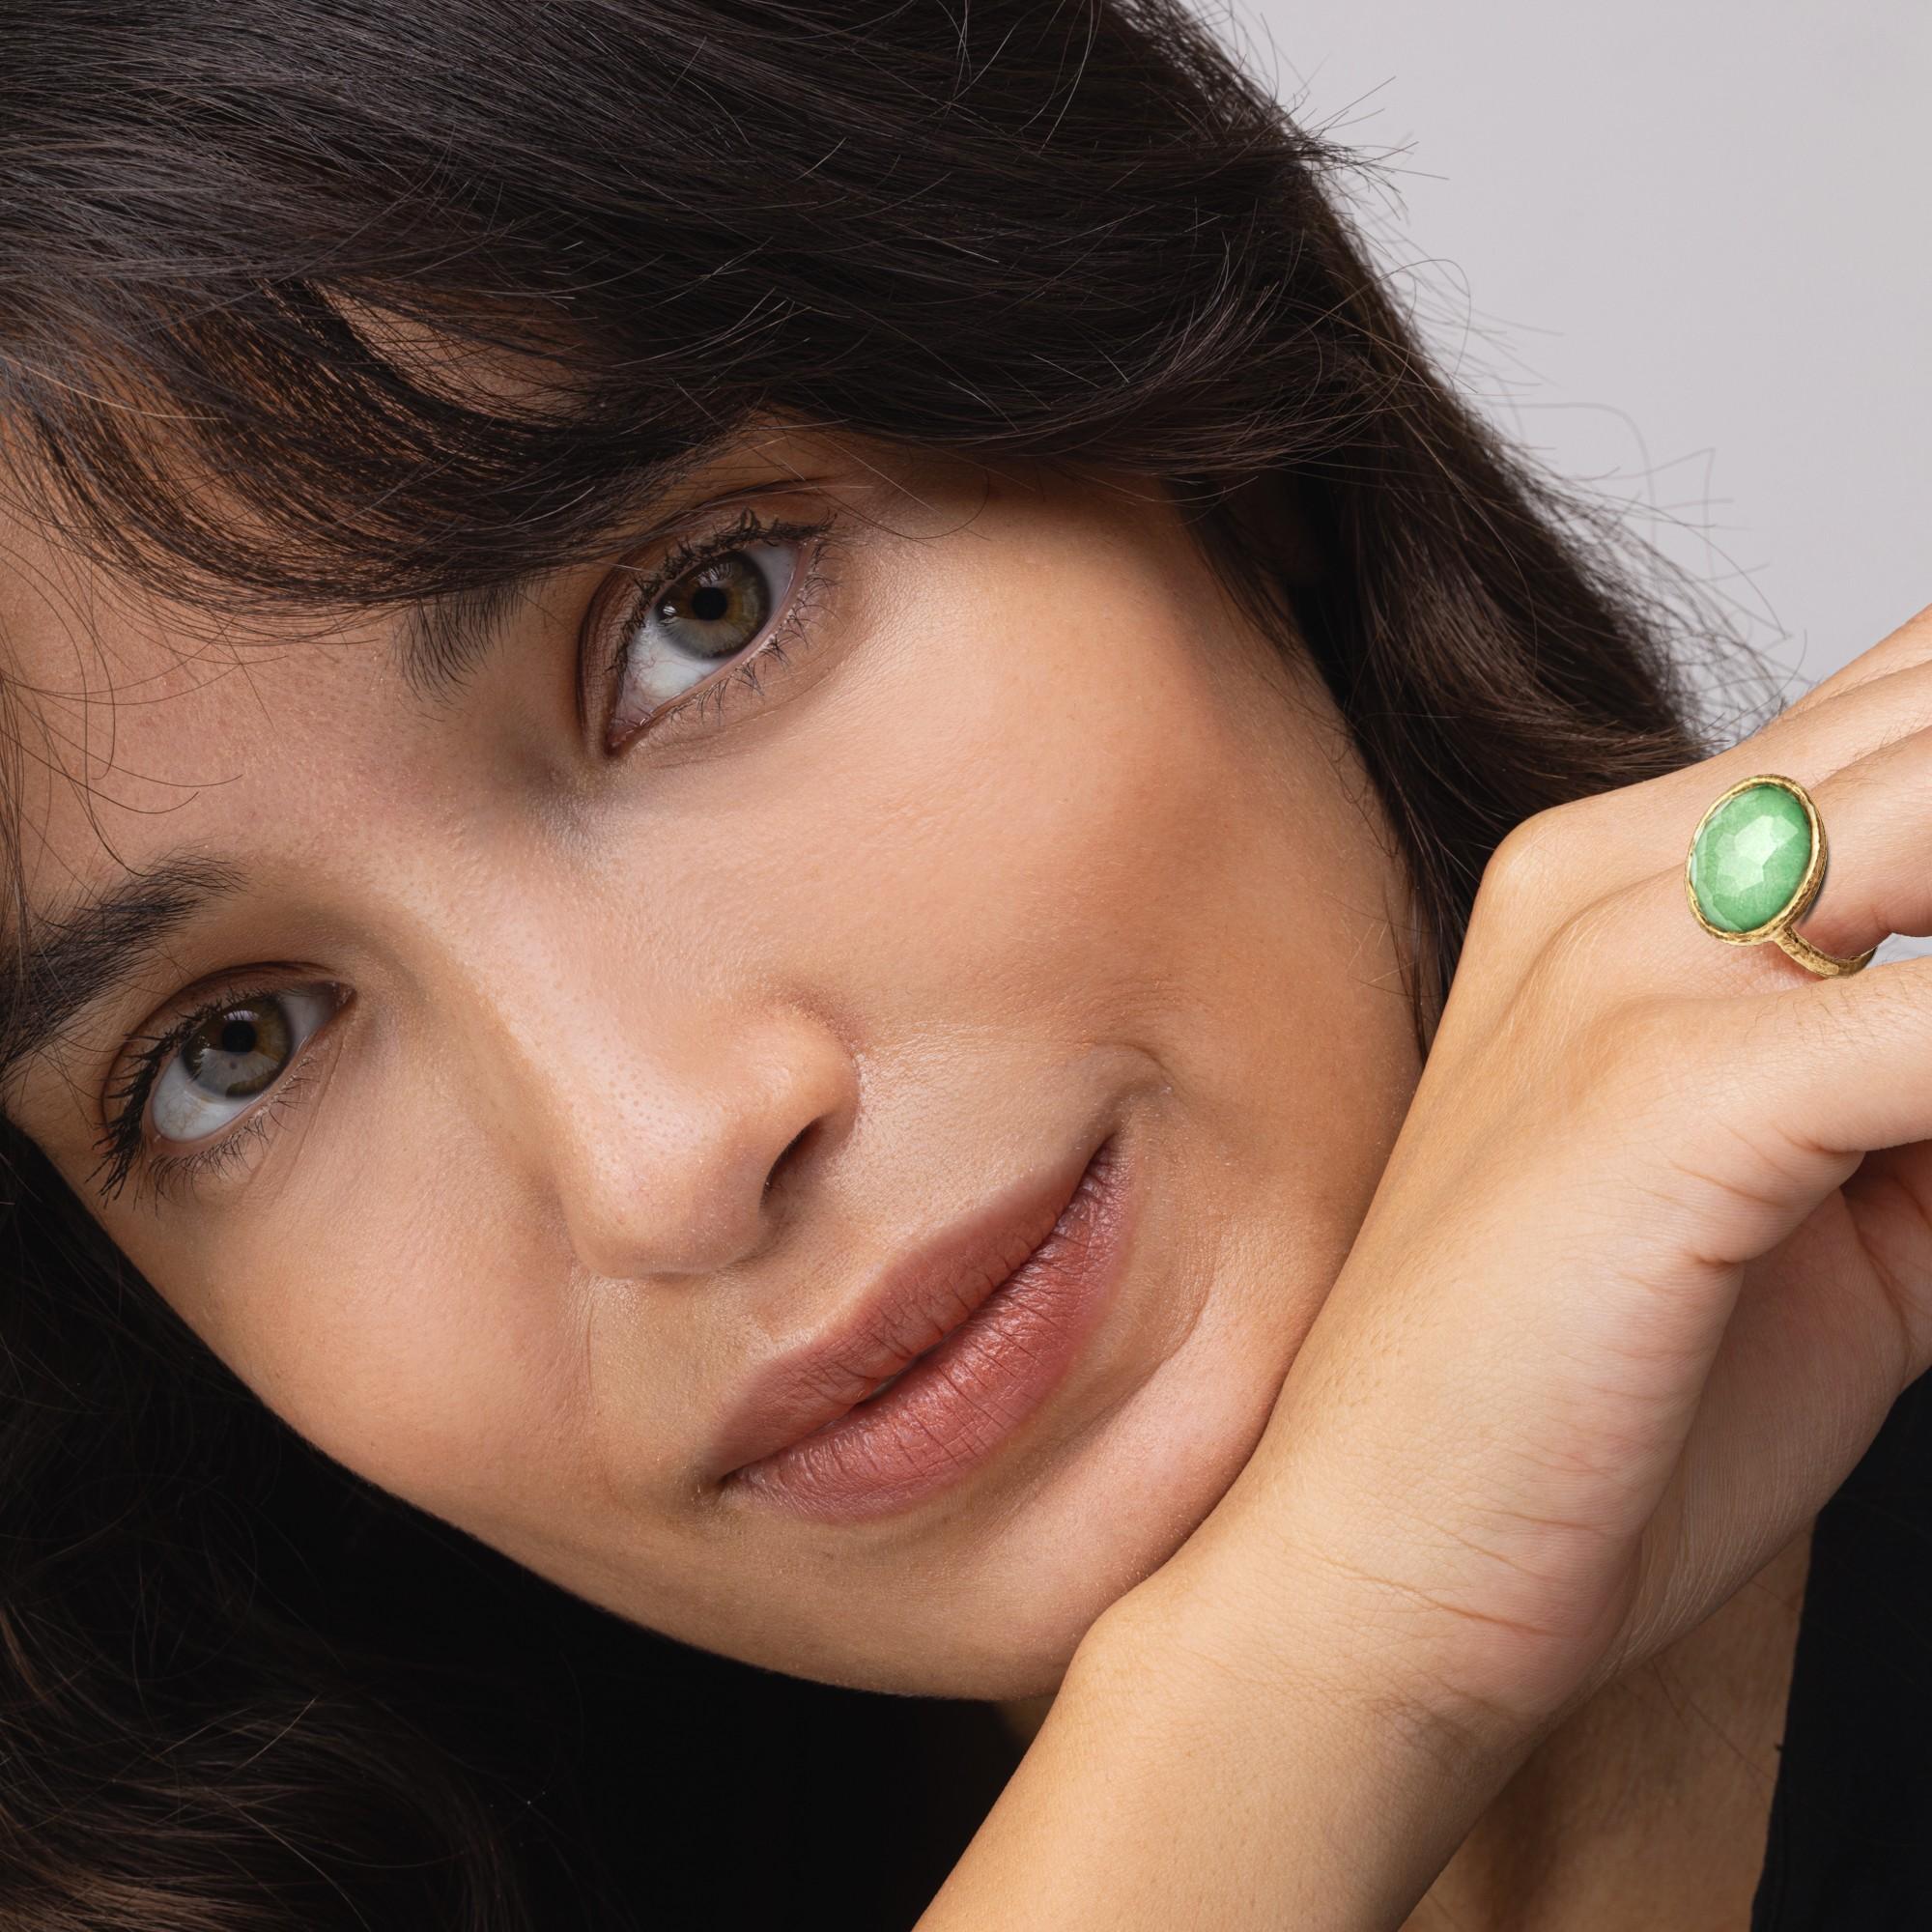 Alex Jona design collection, hand crafted in Italy, 18 Karat yellow gold ring set with a crazy cut quartz over green jade, weighing 8.76 carats.
Size US 6 , can be sized to any specification

Alex Jona jewels stand out, not only for their special